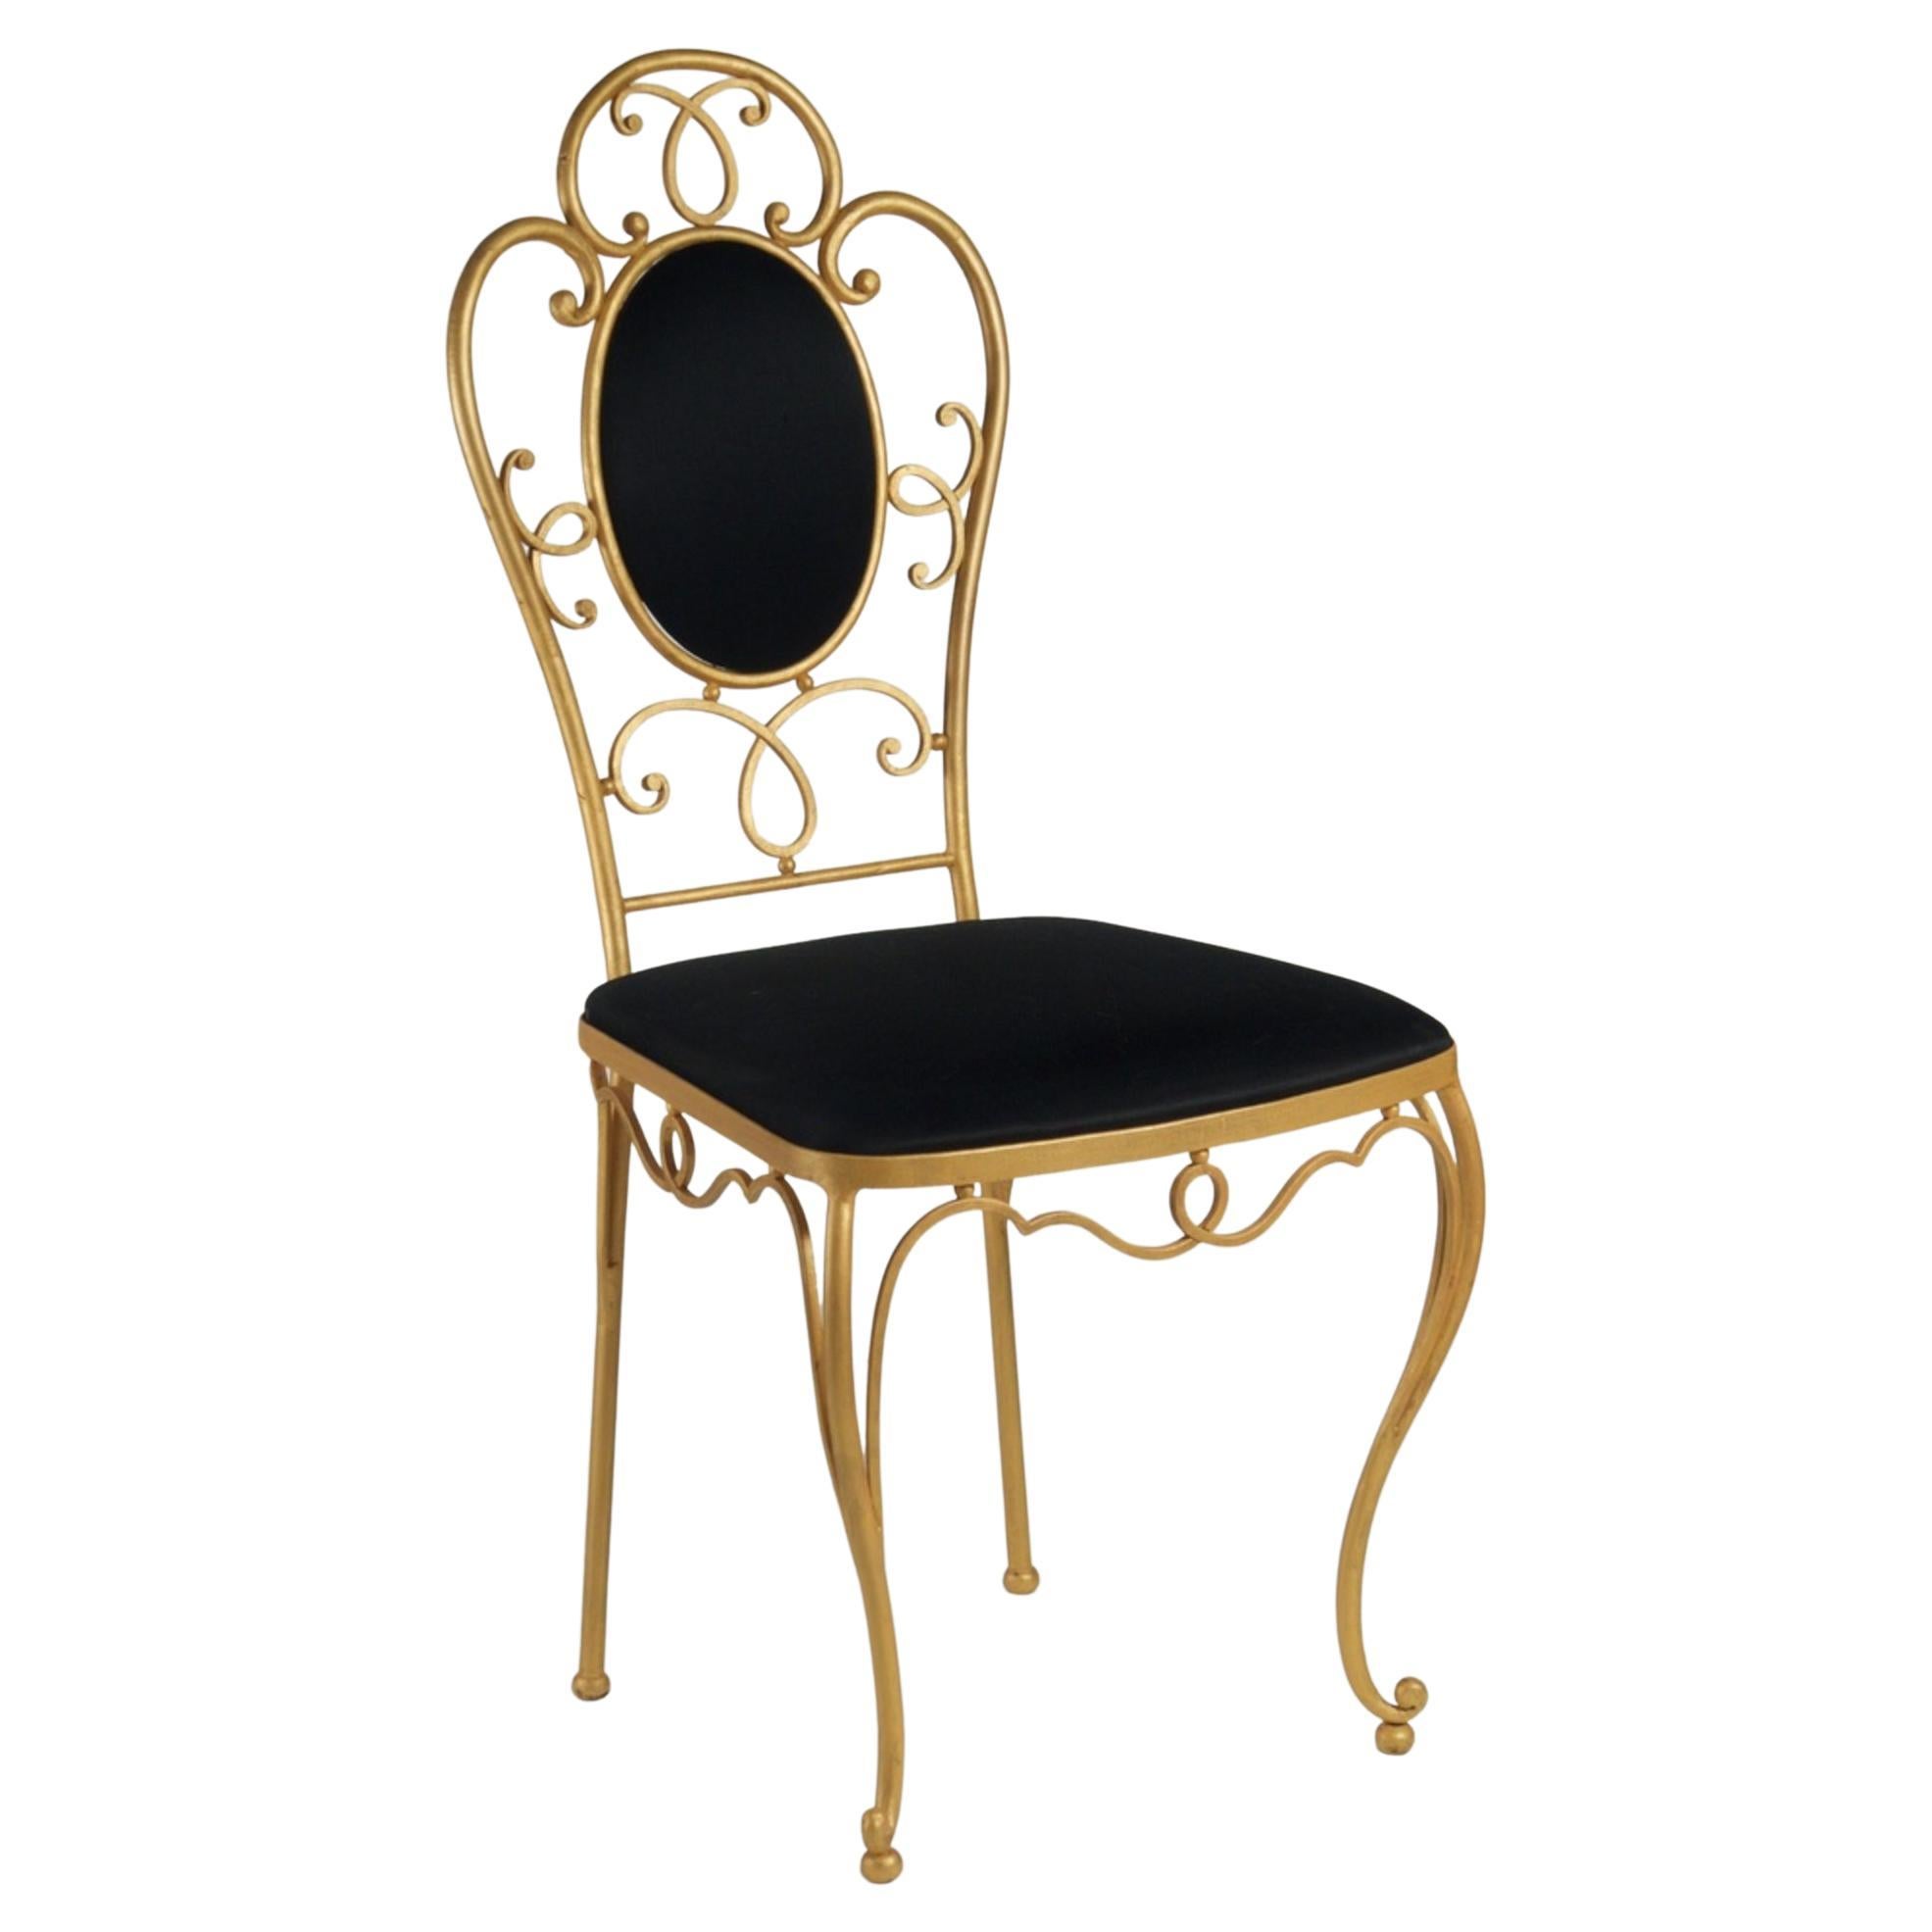 Rene Drouet Set of 4 Gilt Iron Dining Chairs For Sale